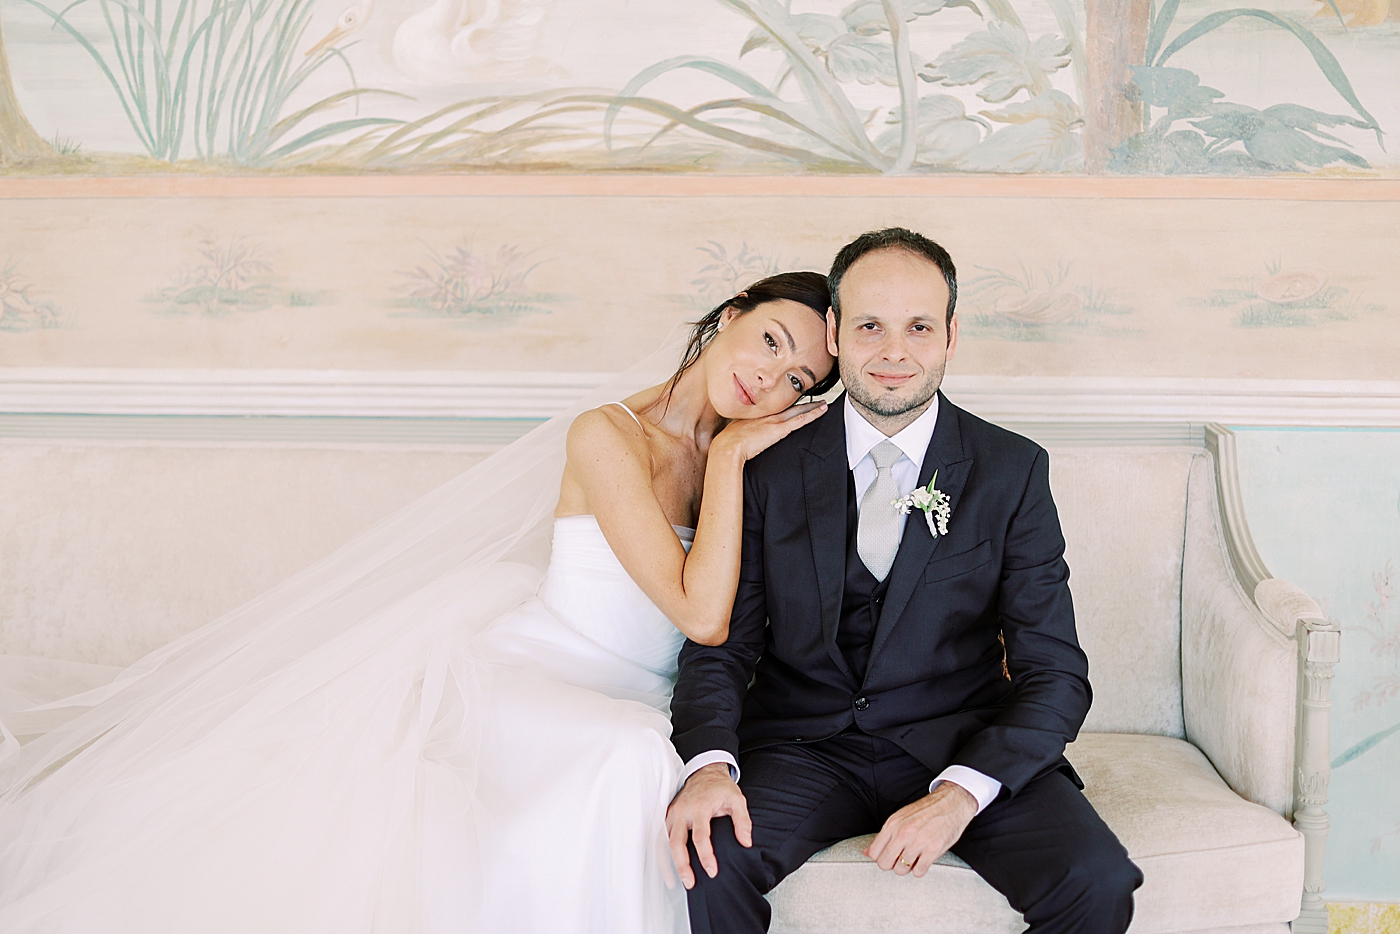 Bride and groom sitting on a sofa | Image by Diane Sotero Photography